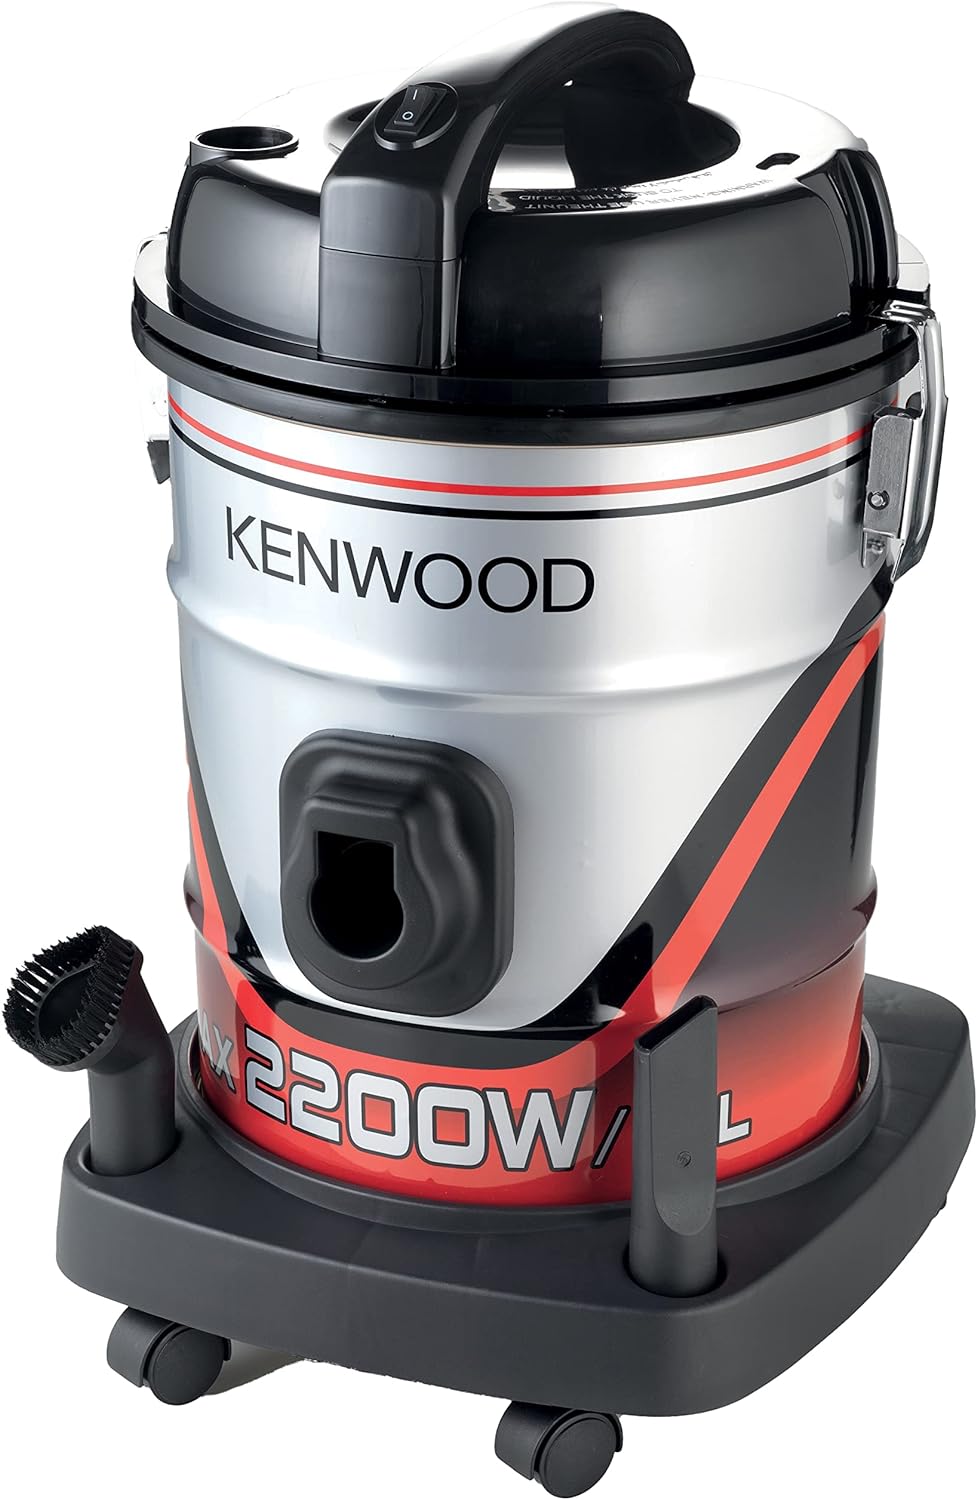 Kenwood Drum Vacuum Cleaner, 2200W, 25L Tank Capacity, 8m Extra Long Power Cord, Removable and Washable Filter, Upholstery Brush and Crevice Tool, VDM60, Multicolour, Black